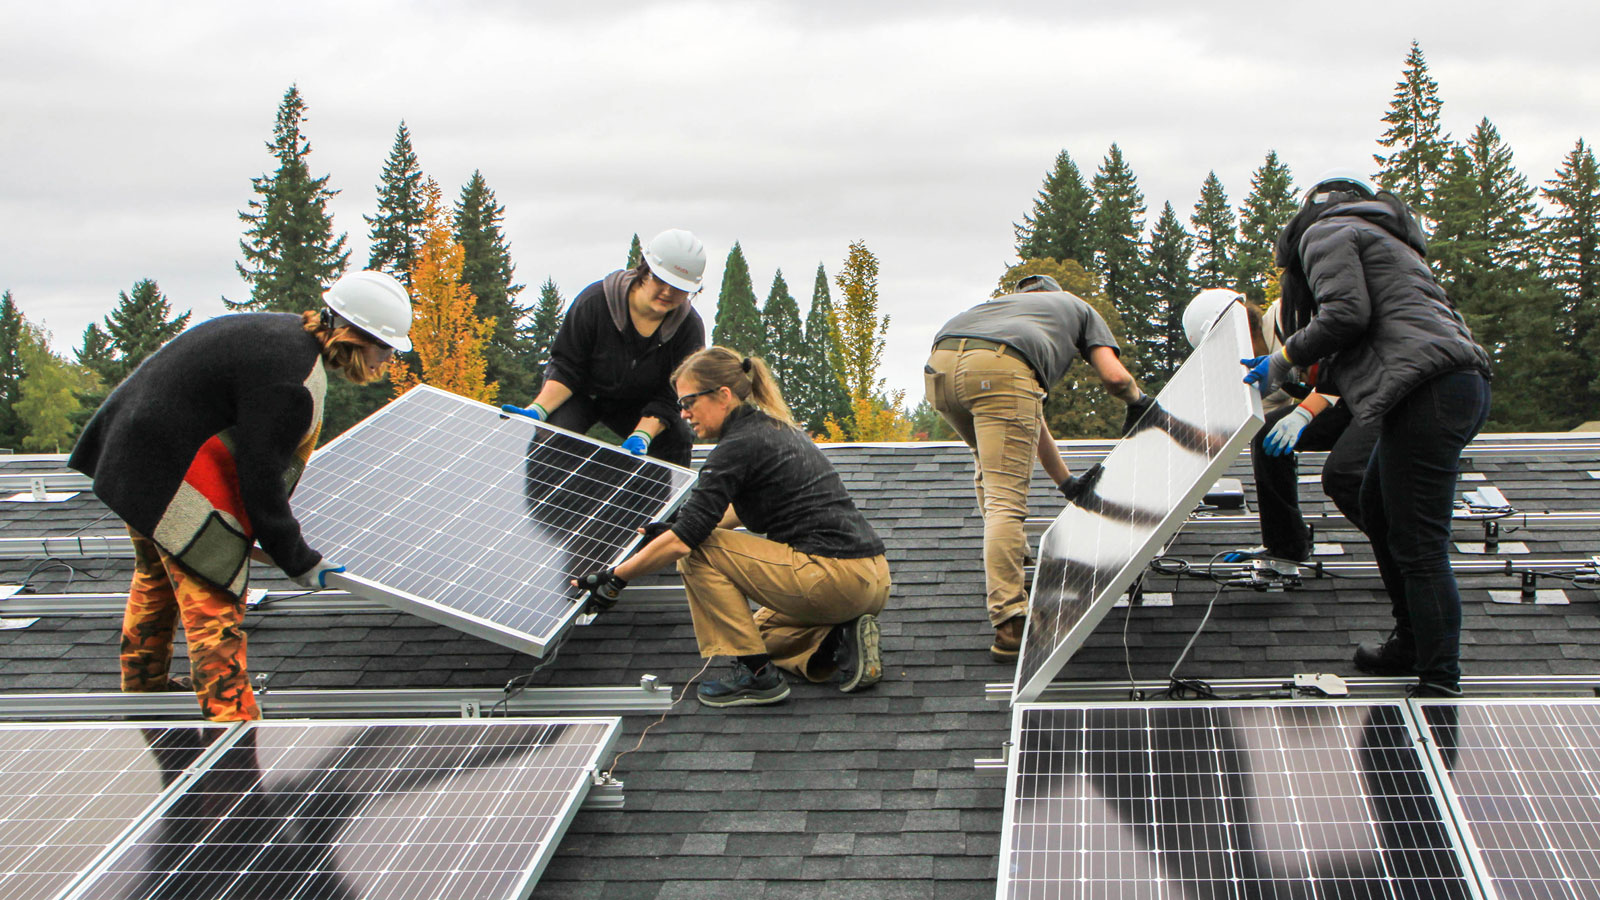 Students standing on top of a mock roof install solar panels